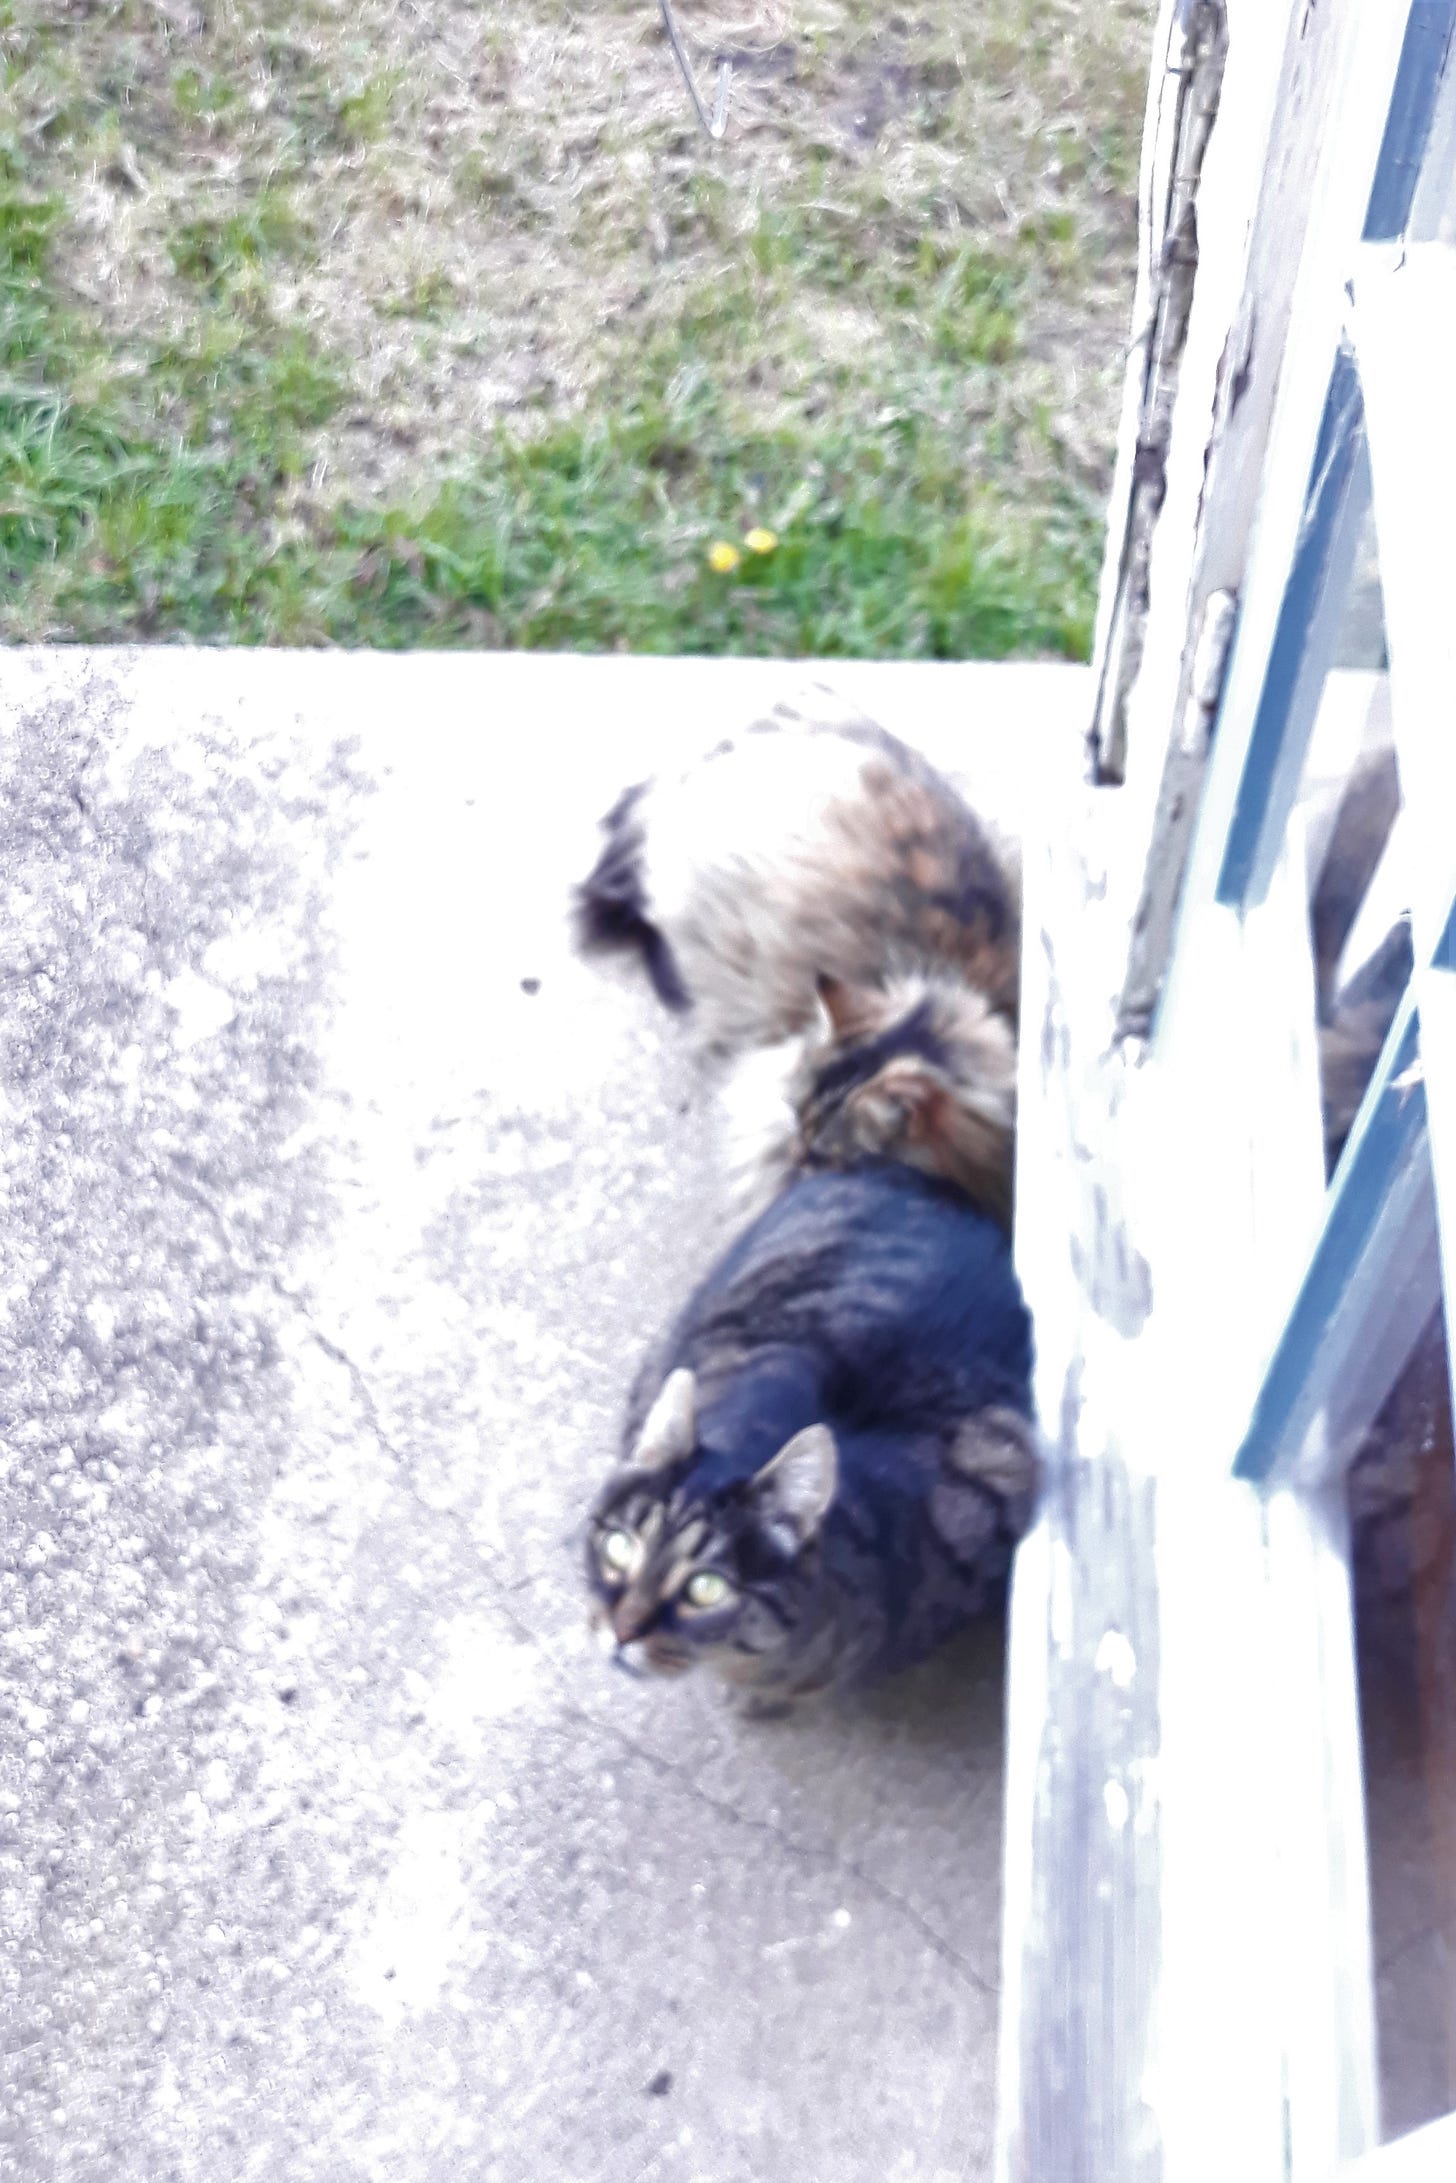 A tabby cat with black and brown markings is crouched on the concrete near a door. He looks up at the camera. A fluffy light brown cat is asleep on his rear end. In the background there is grass and you can see two yellow flowers, maybe daffodils. The whole photo is blurred and there is a crack in the pavement.